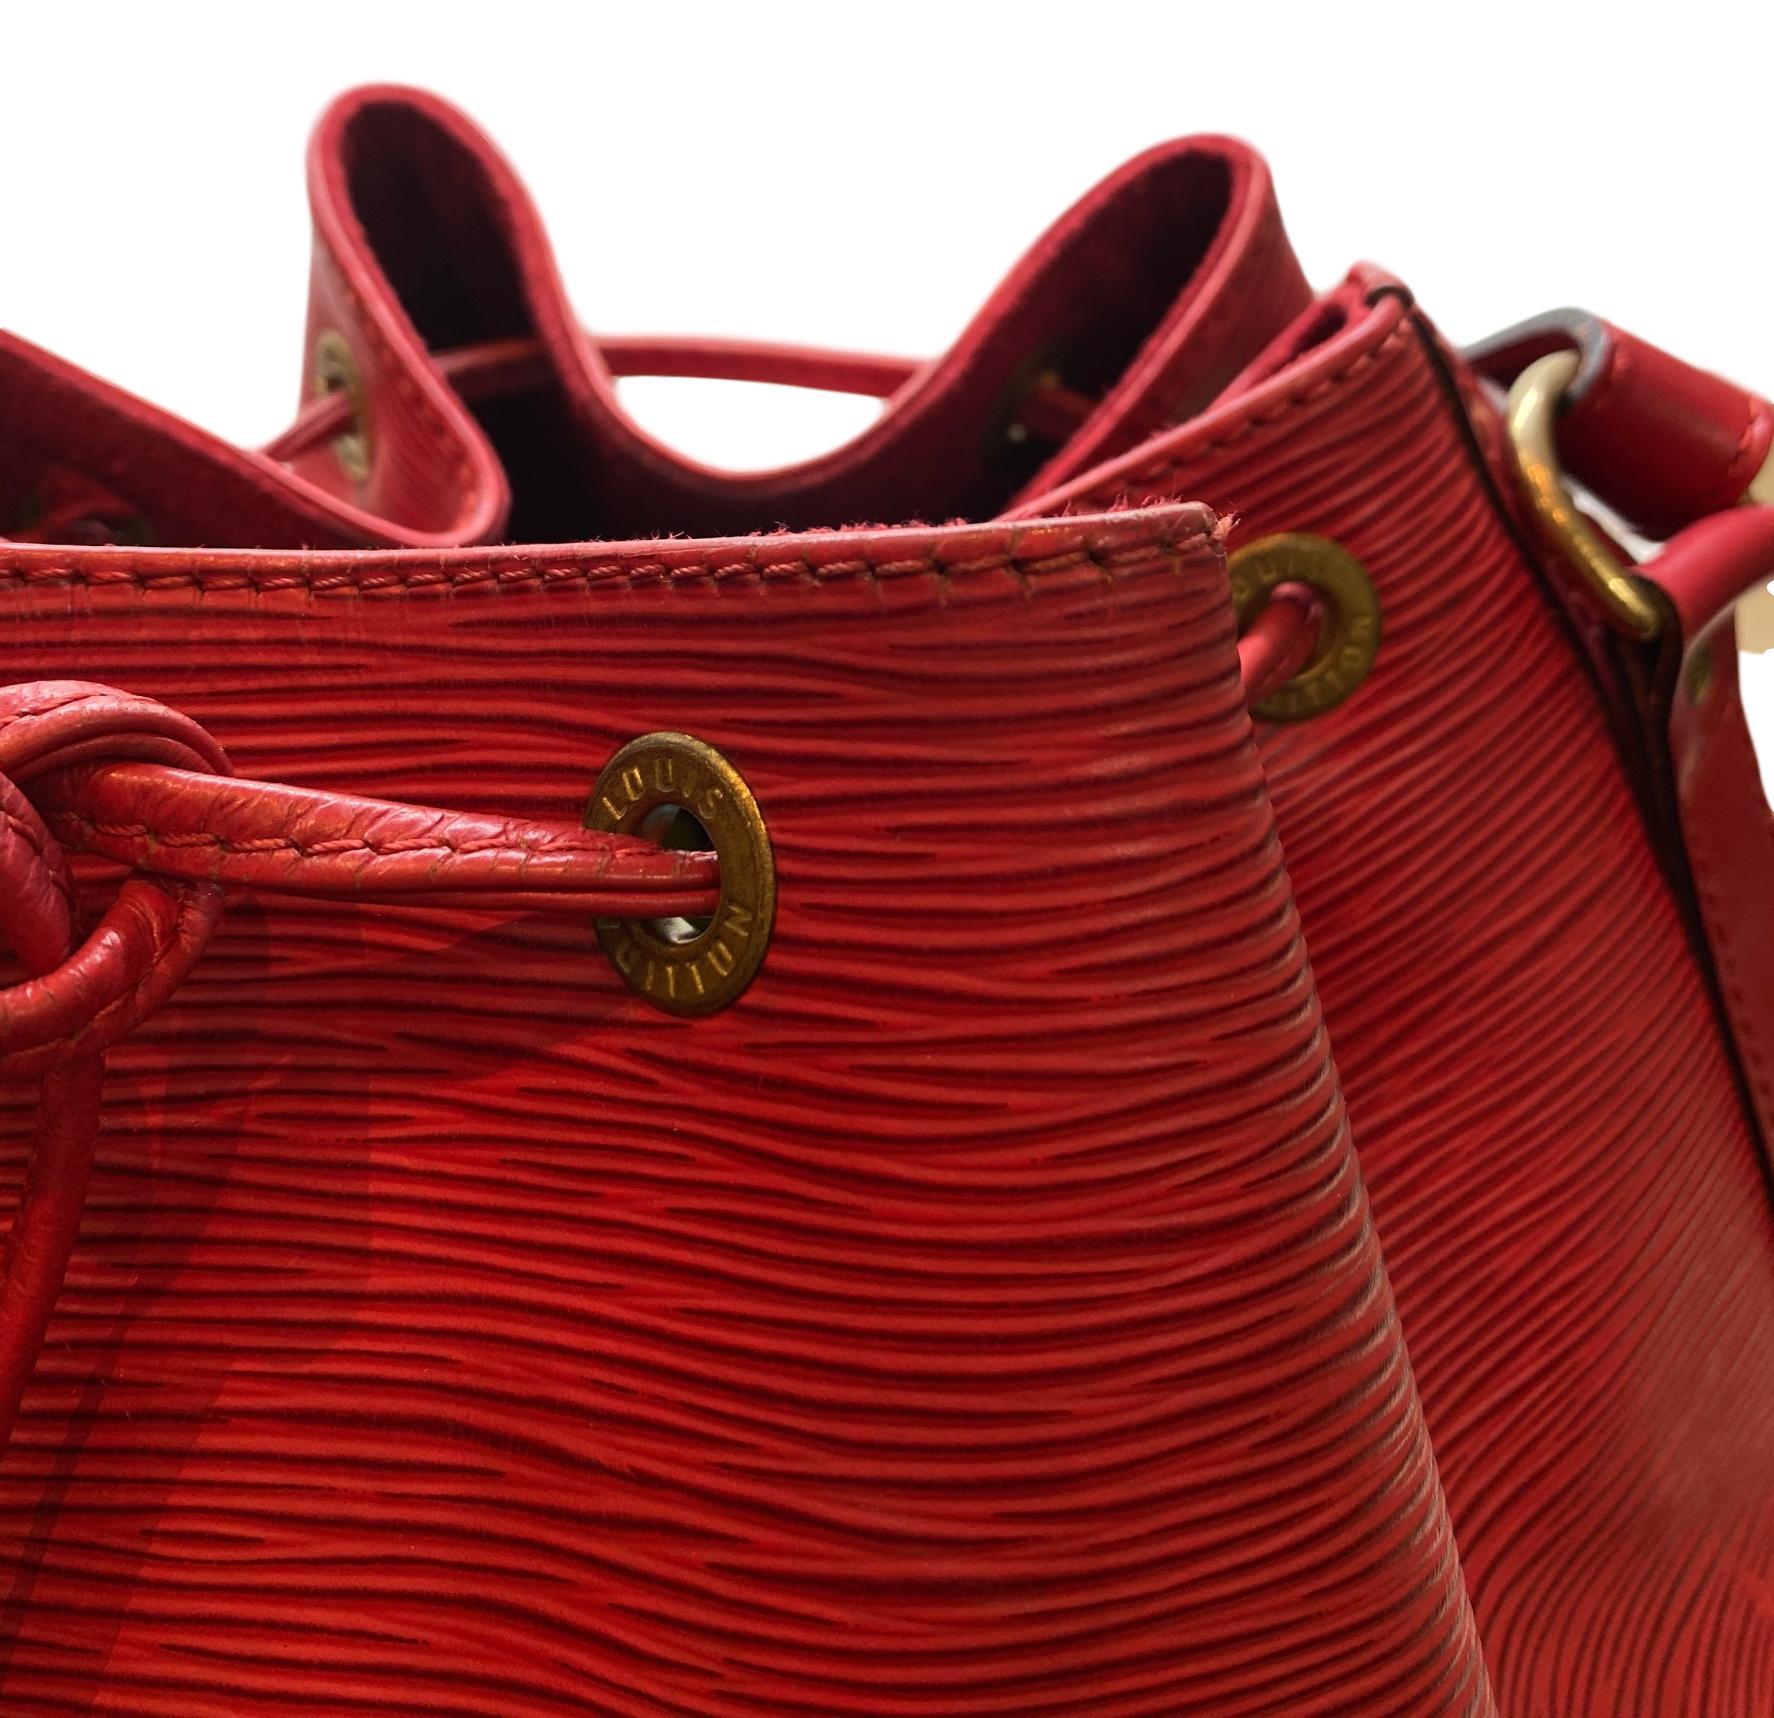 Louis Vuitton Noe PM Bucket Bag in Red EPI Leather, France 1994. 1